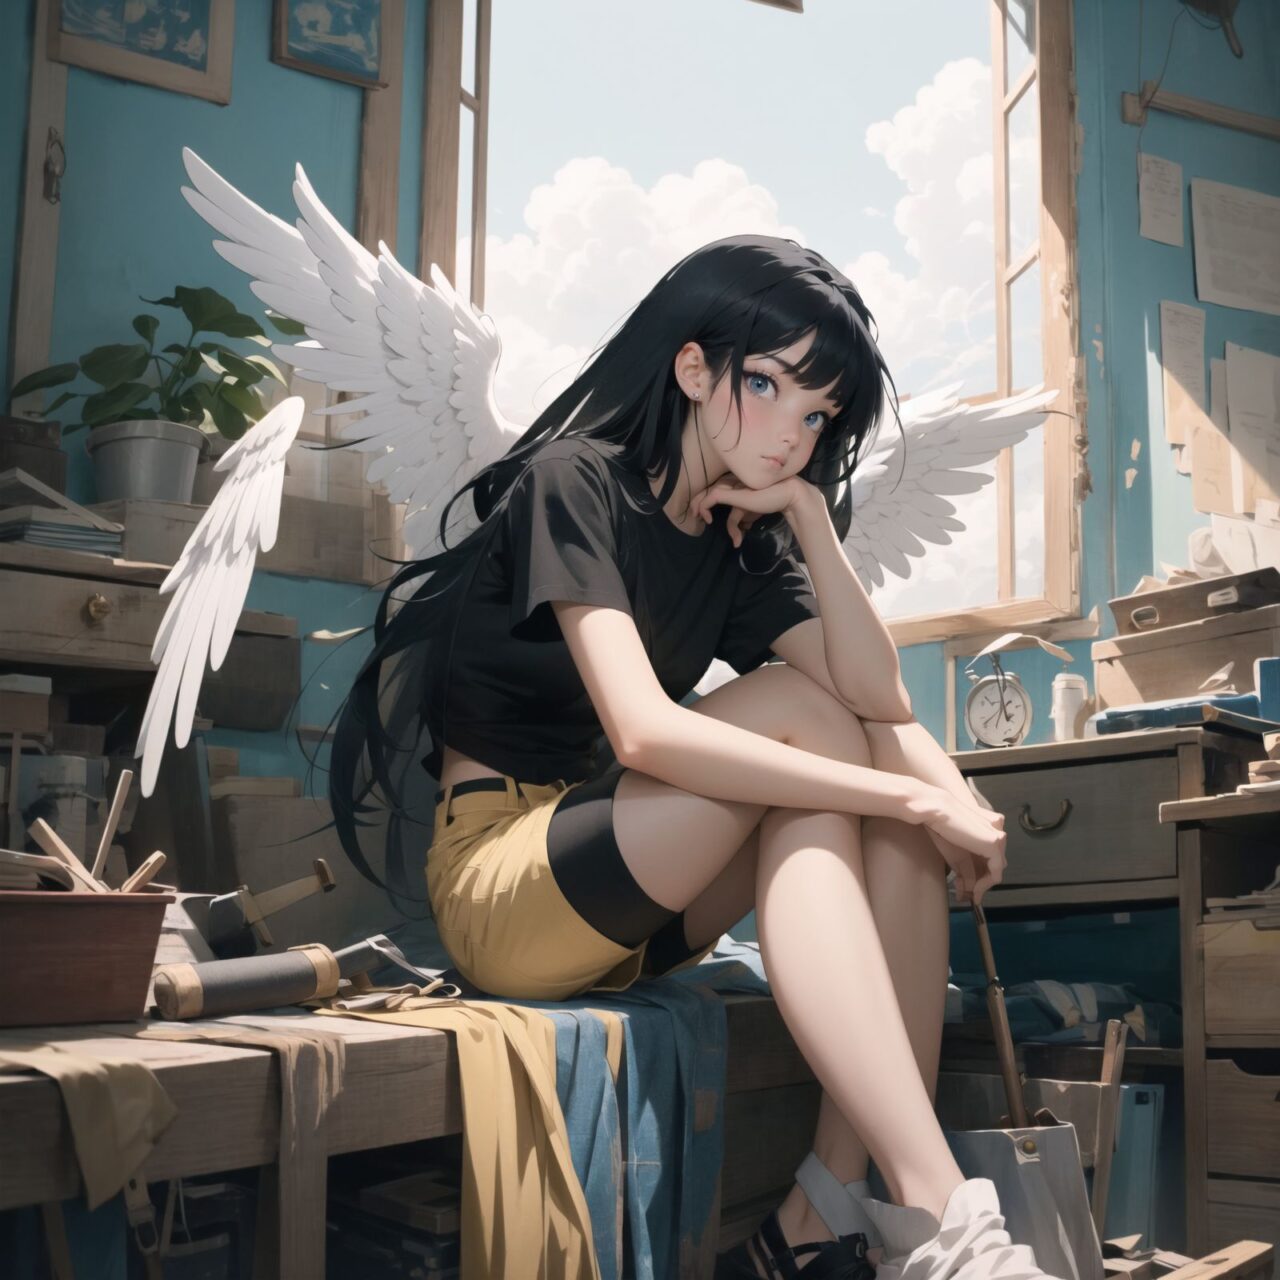 A detailed anime-style illustration of (an emo angel girl) with long black hair, sitting in a cluttered room. She is wearing a black t-shirt and shorts, with a listless expression. The background features various notes, tools, and a bright yellow wall with a blue sky visible through a window, creating a vibrant and eclectic atmosphere.